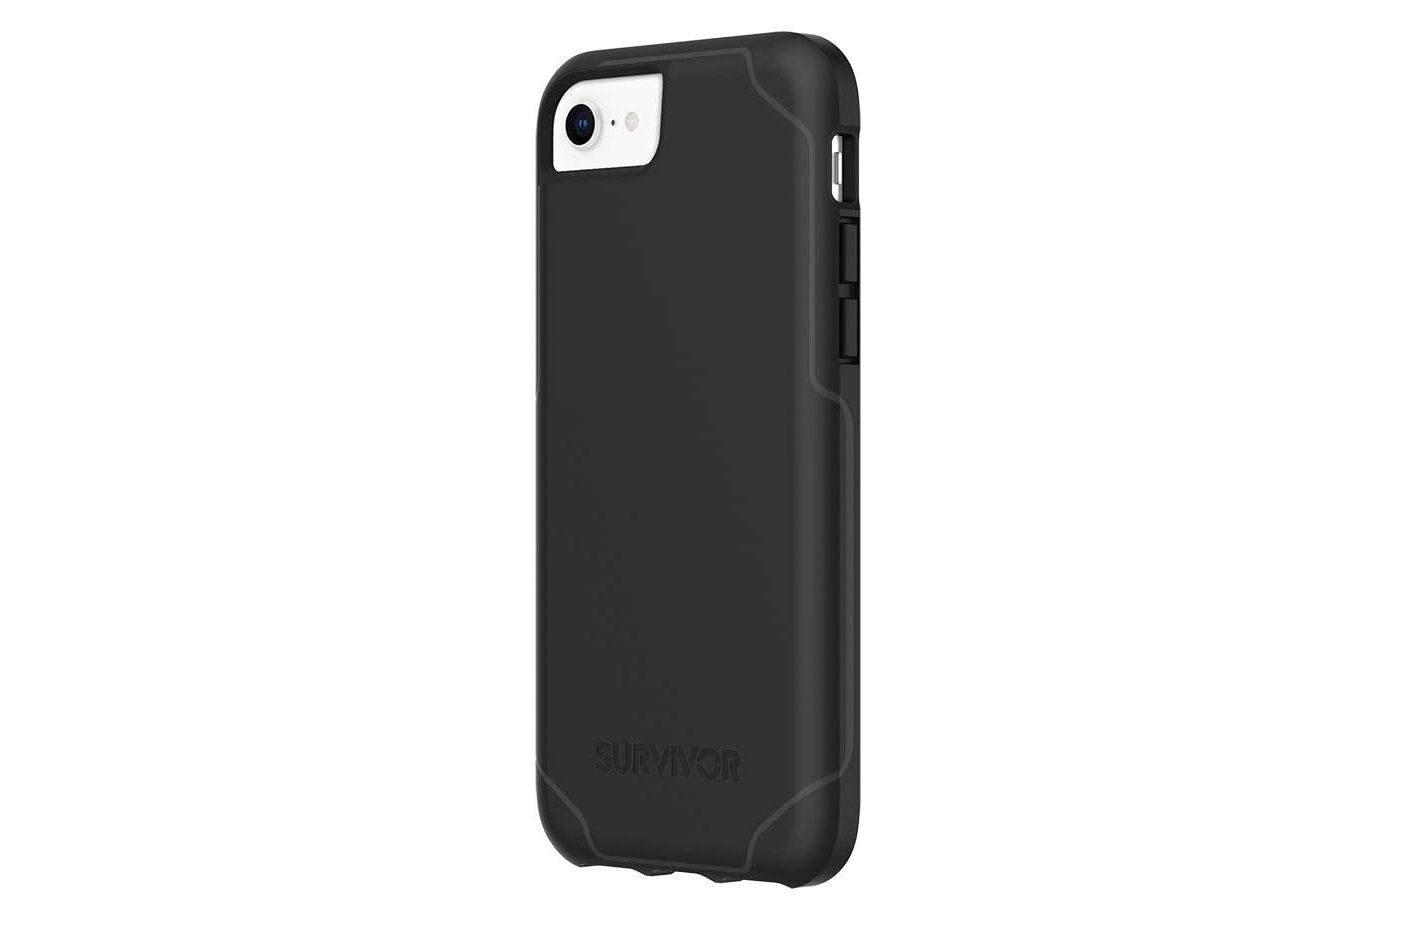 Best heavy duty iPhone SE cases - updated 2021